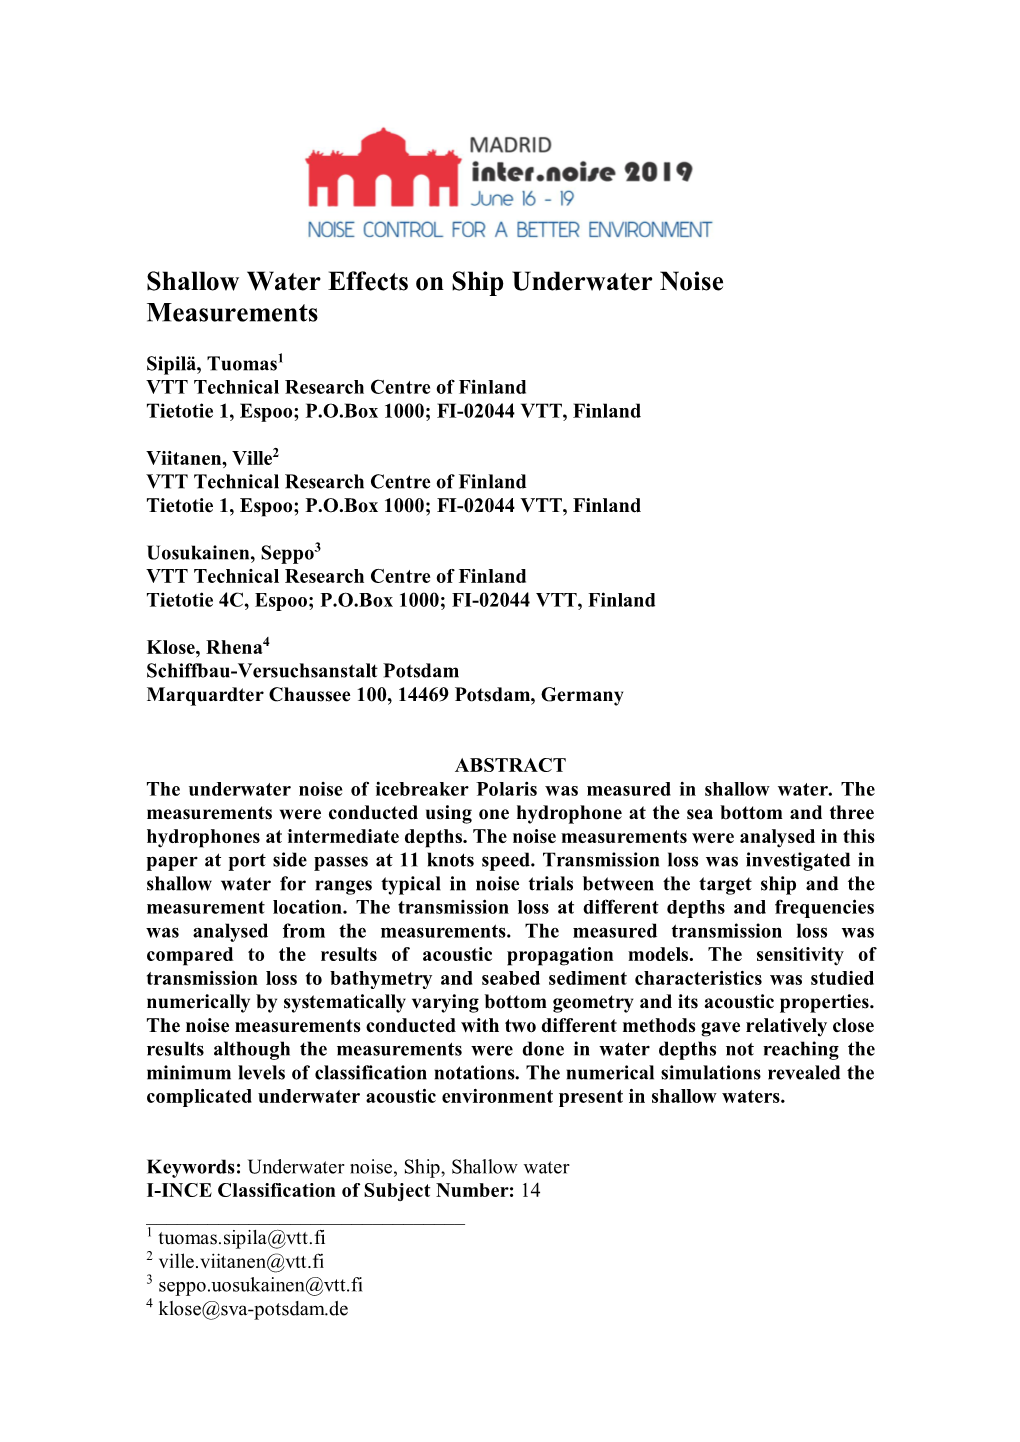 Shallow Water Effects on Ship Underwater Noise Measurements